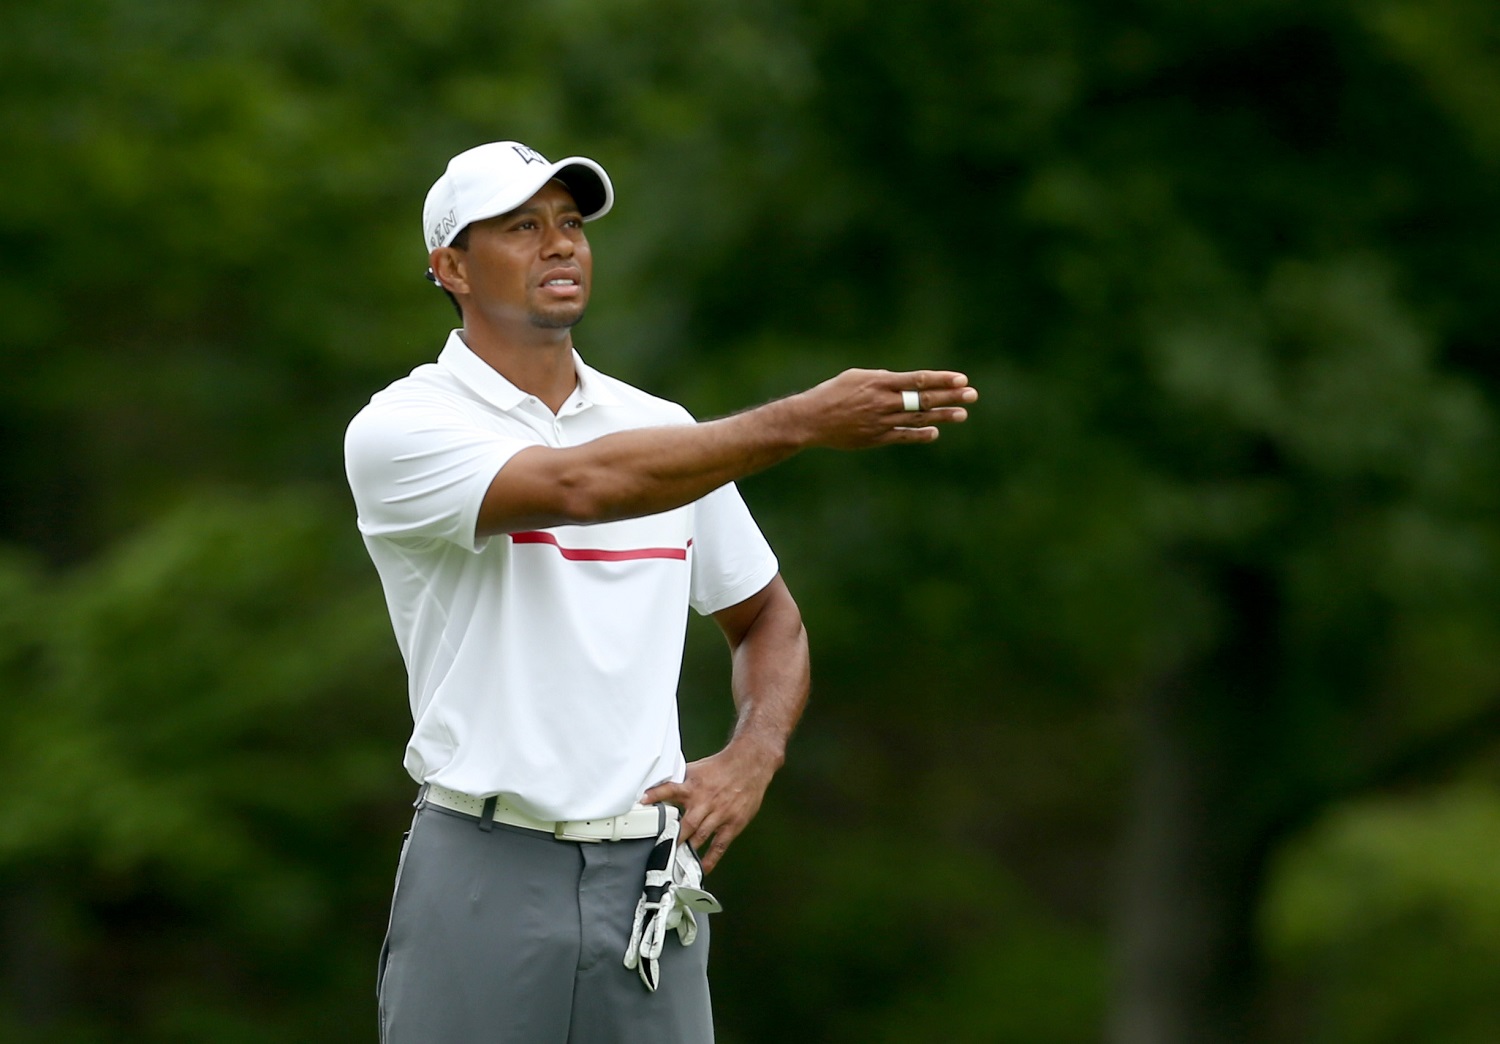 Tiger Woods Shot the Worst Round of His PGA Tour Career at the Memorial in 2015